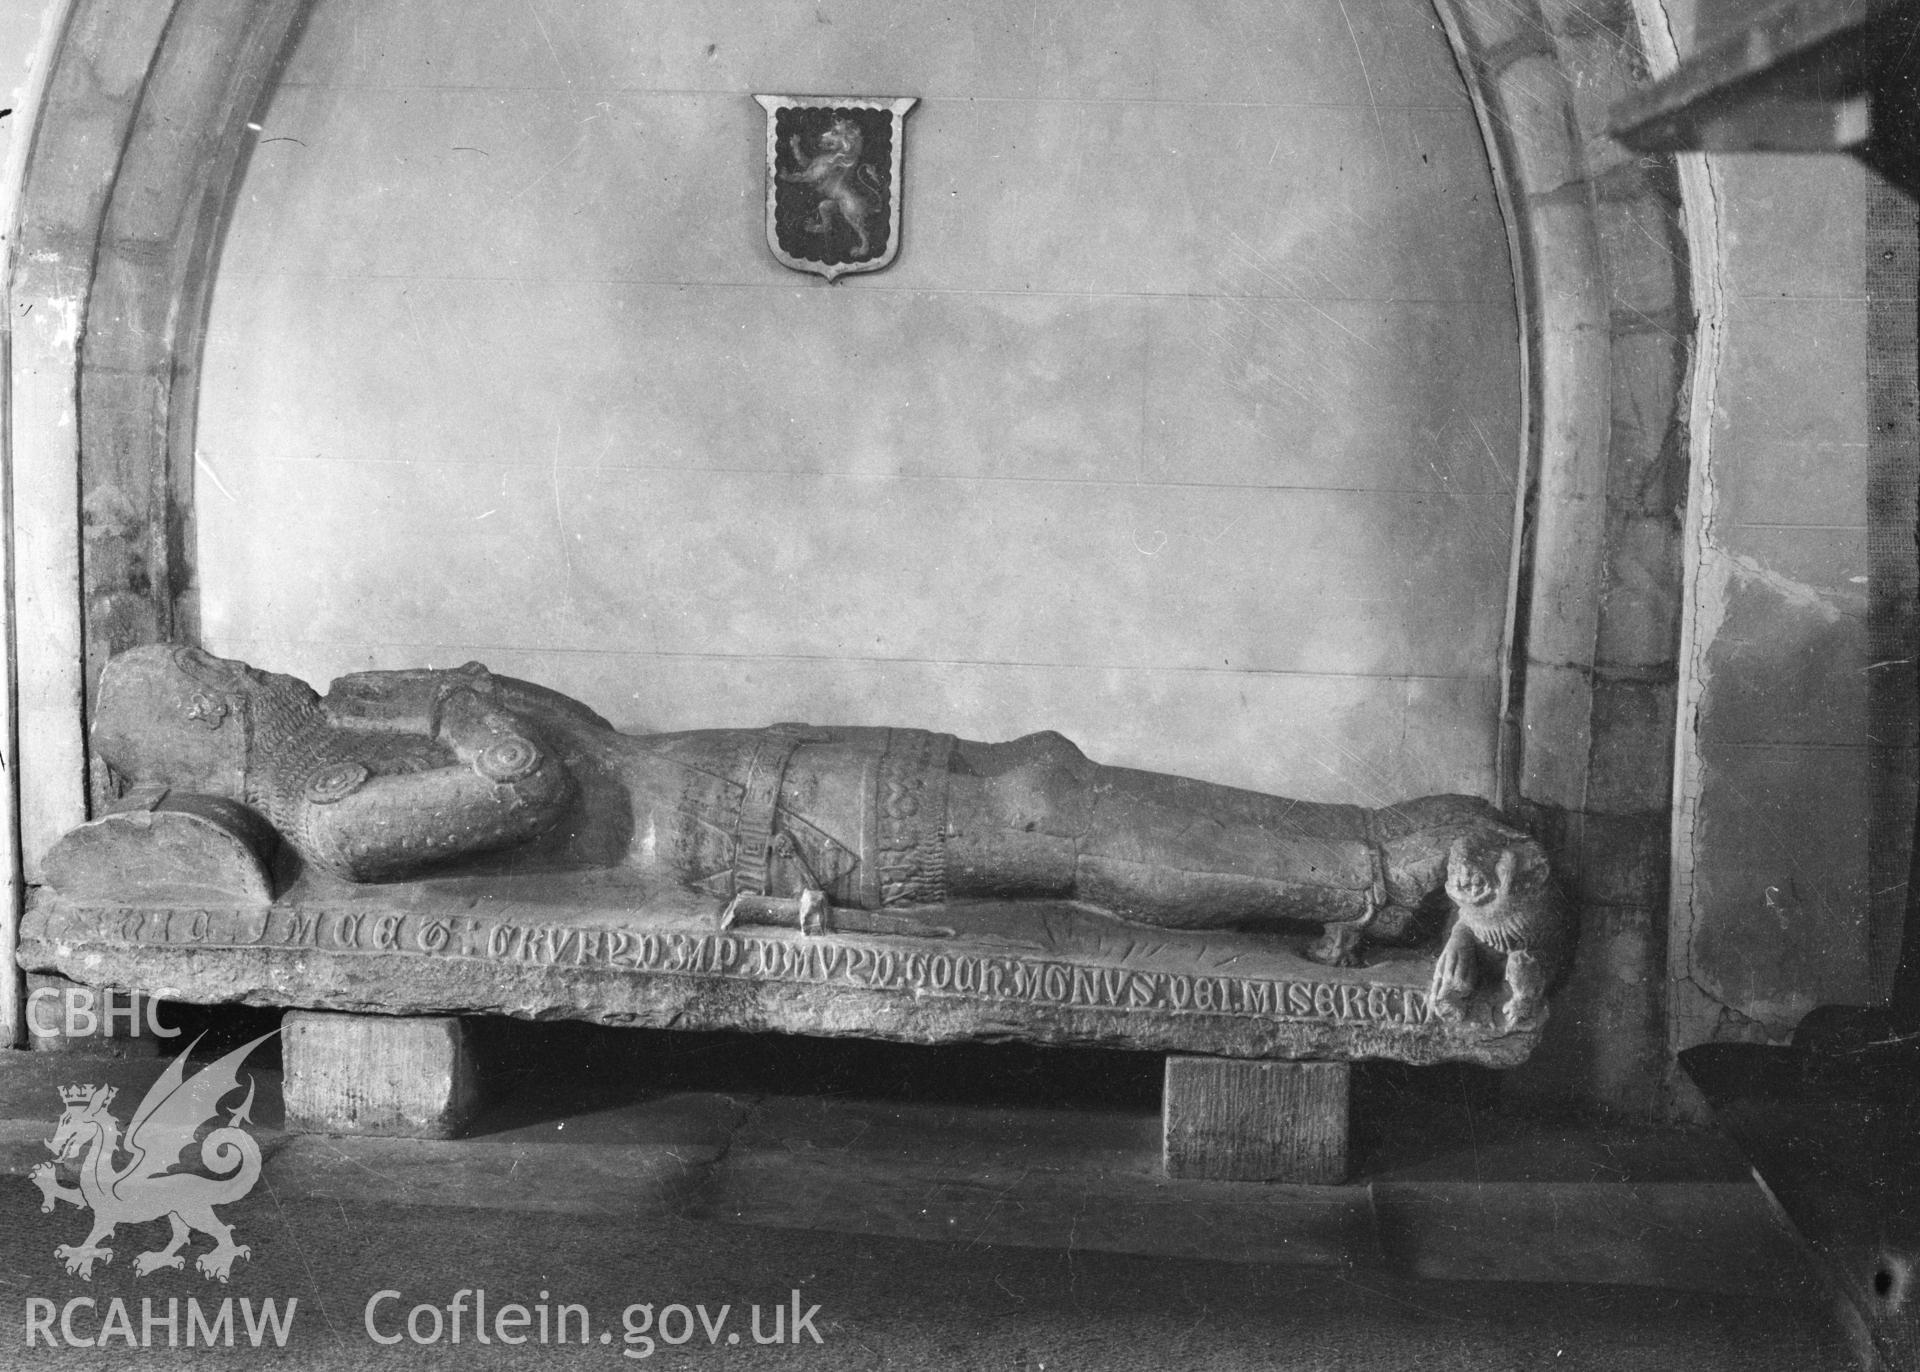 Digital copy of a nitrate negative showing effigy in Betws-y-Coed parish church. From the Cadw Monuments in Care Collection.